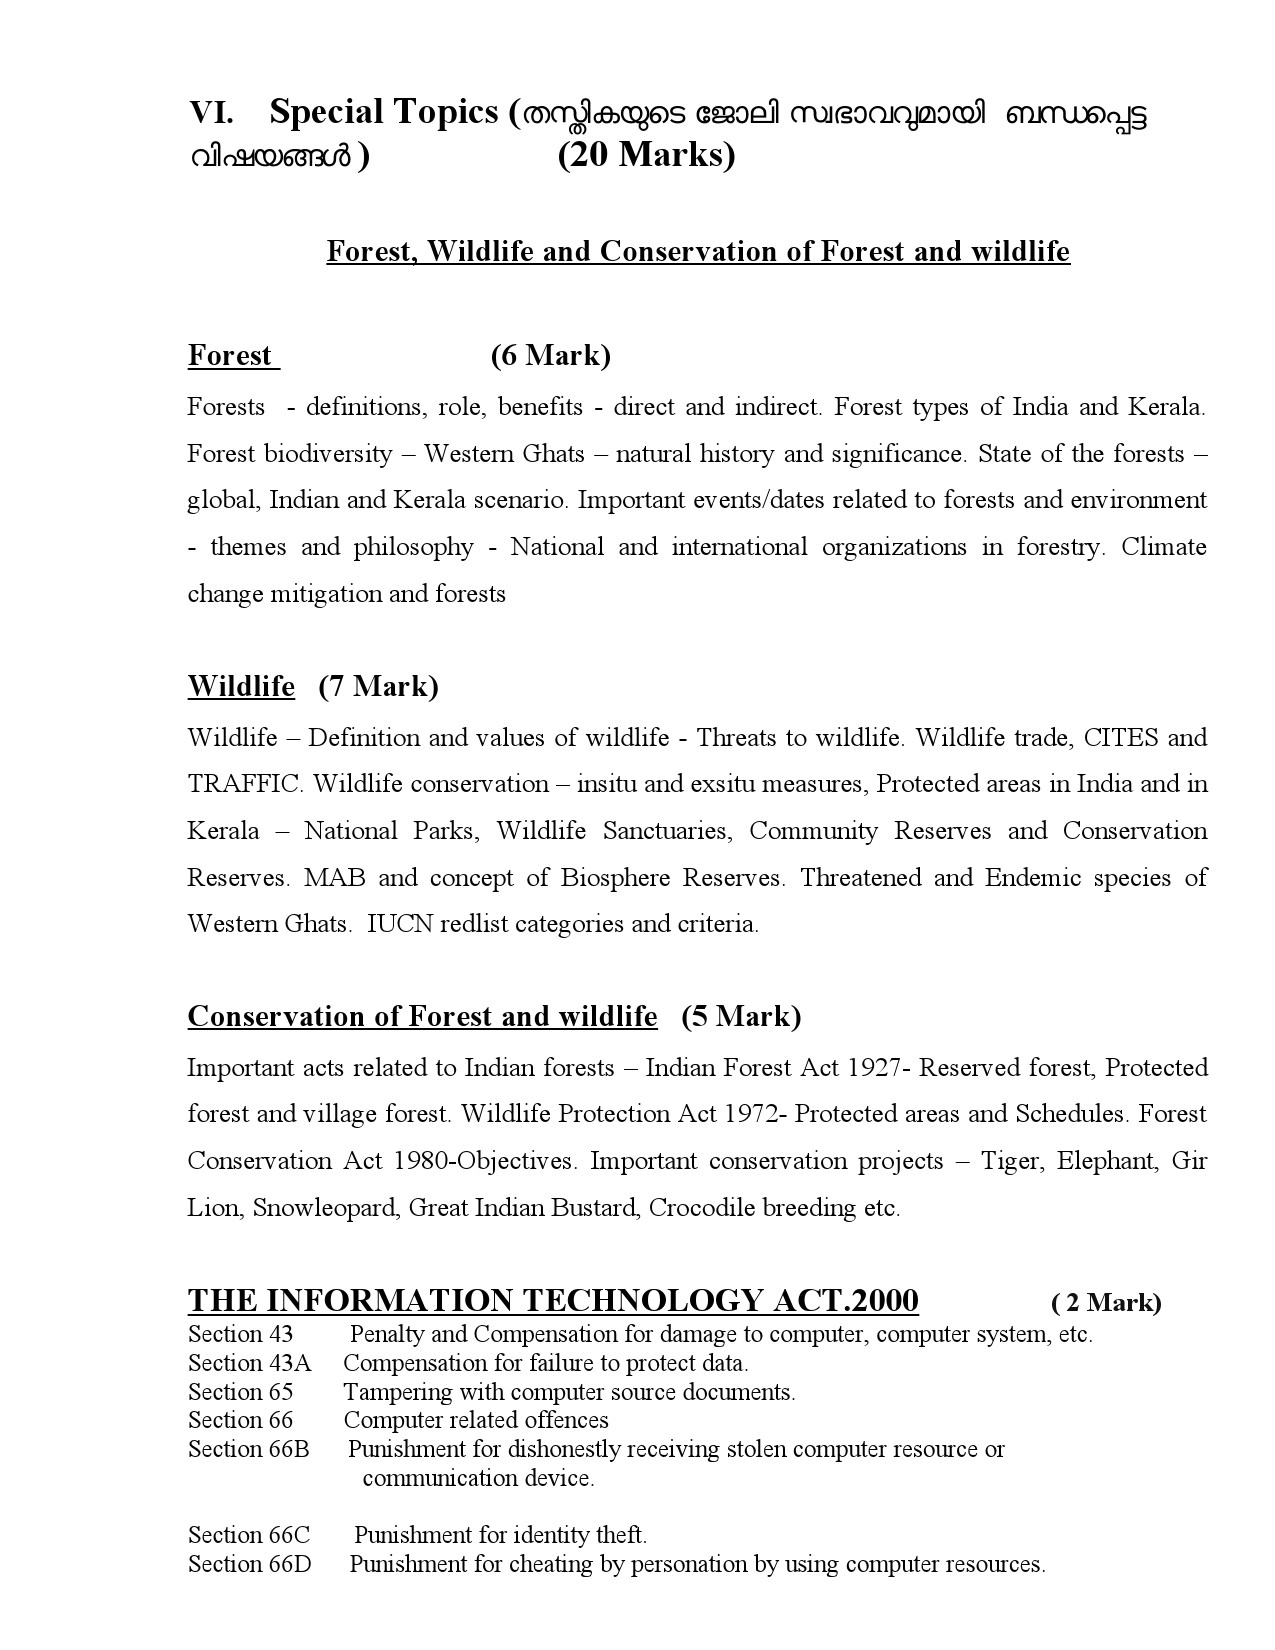 Beat Forest Officer Final Examination Syllabus For Plus Two Level - Notification Image 11